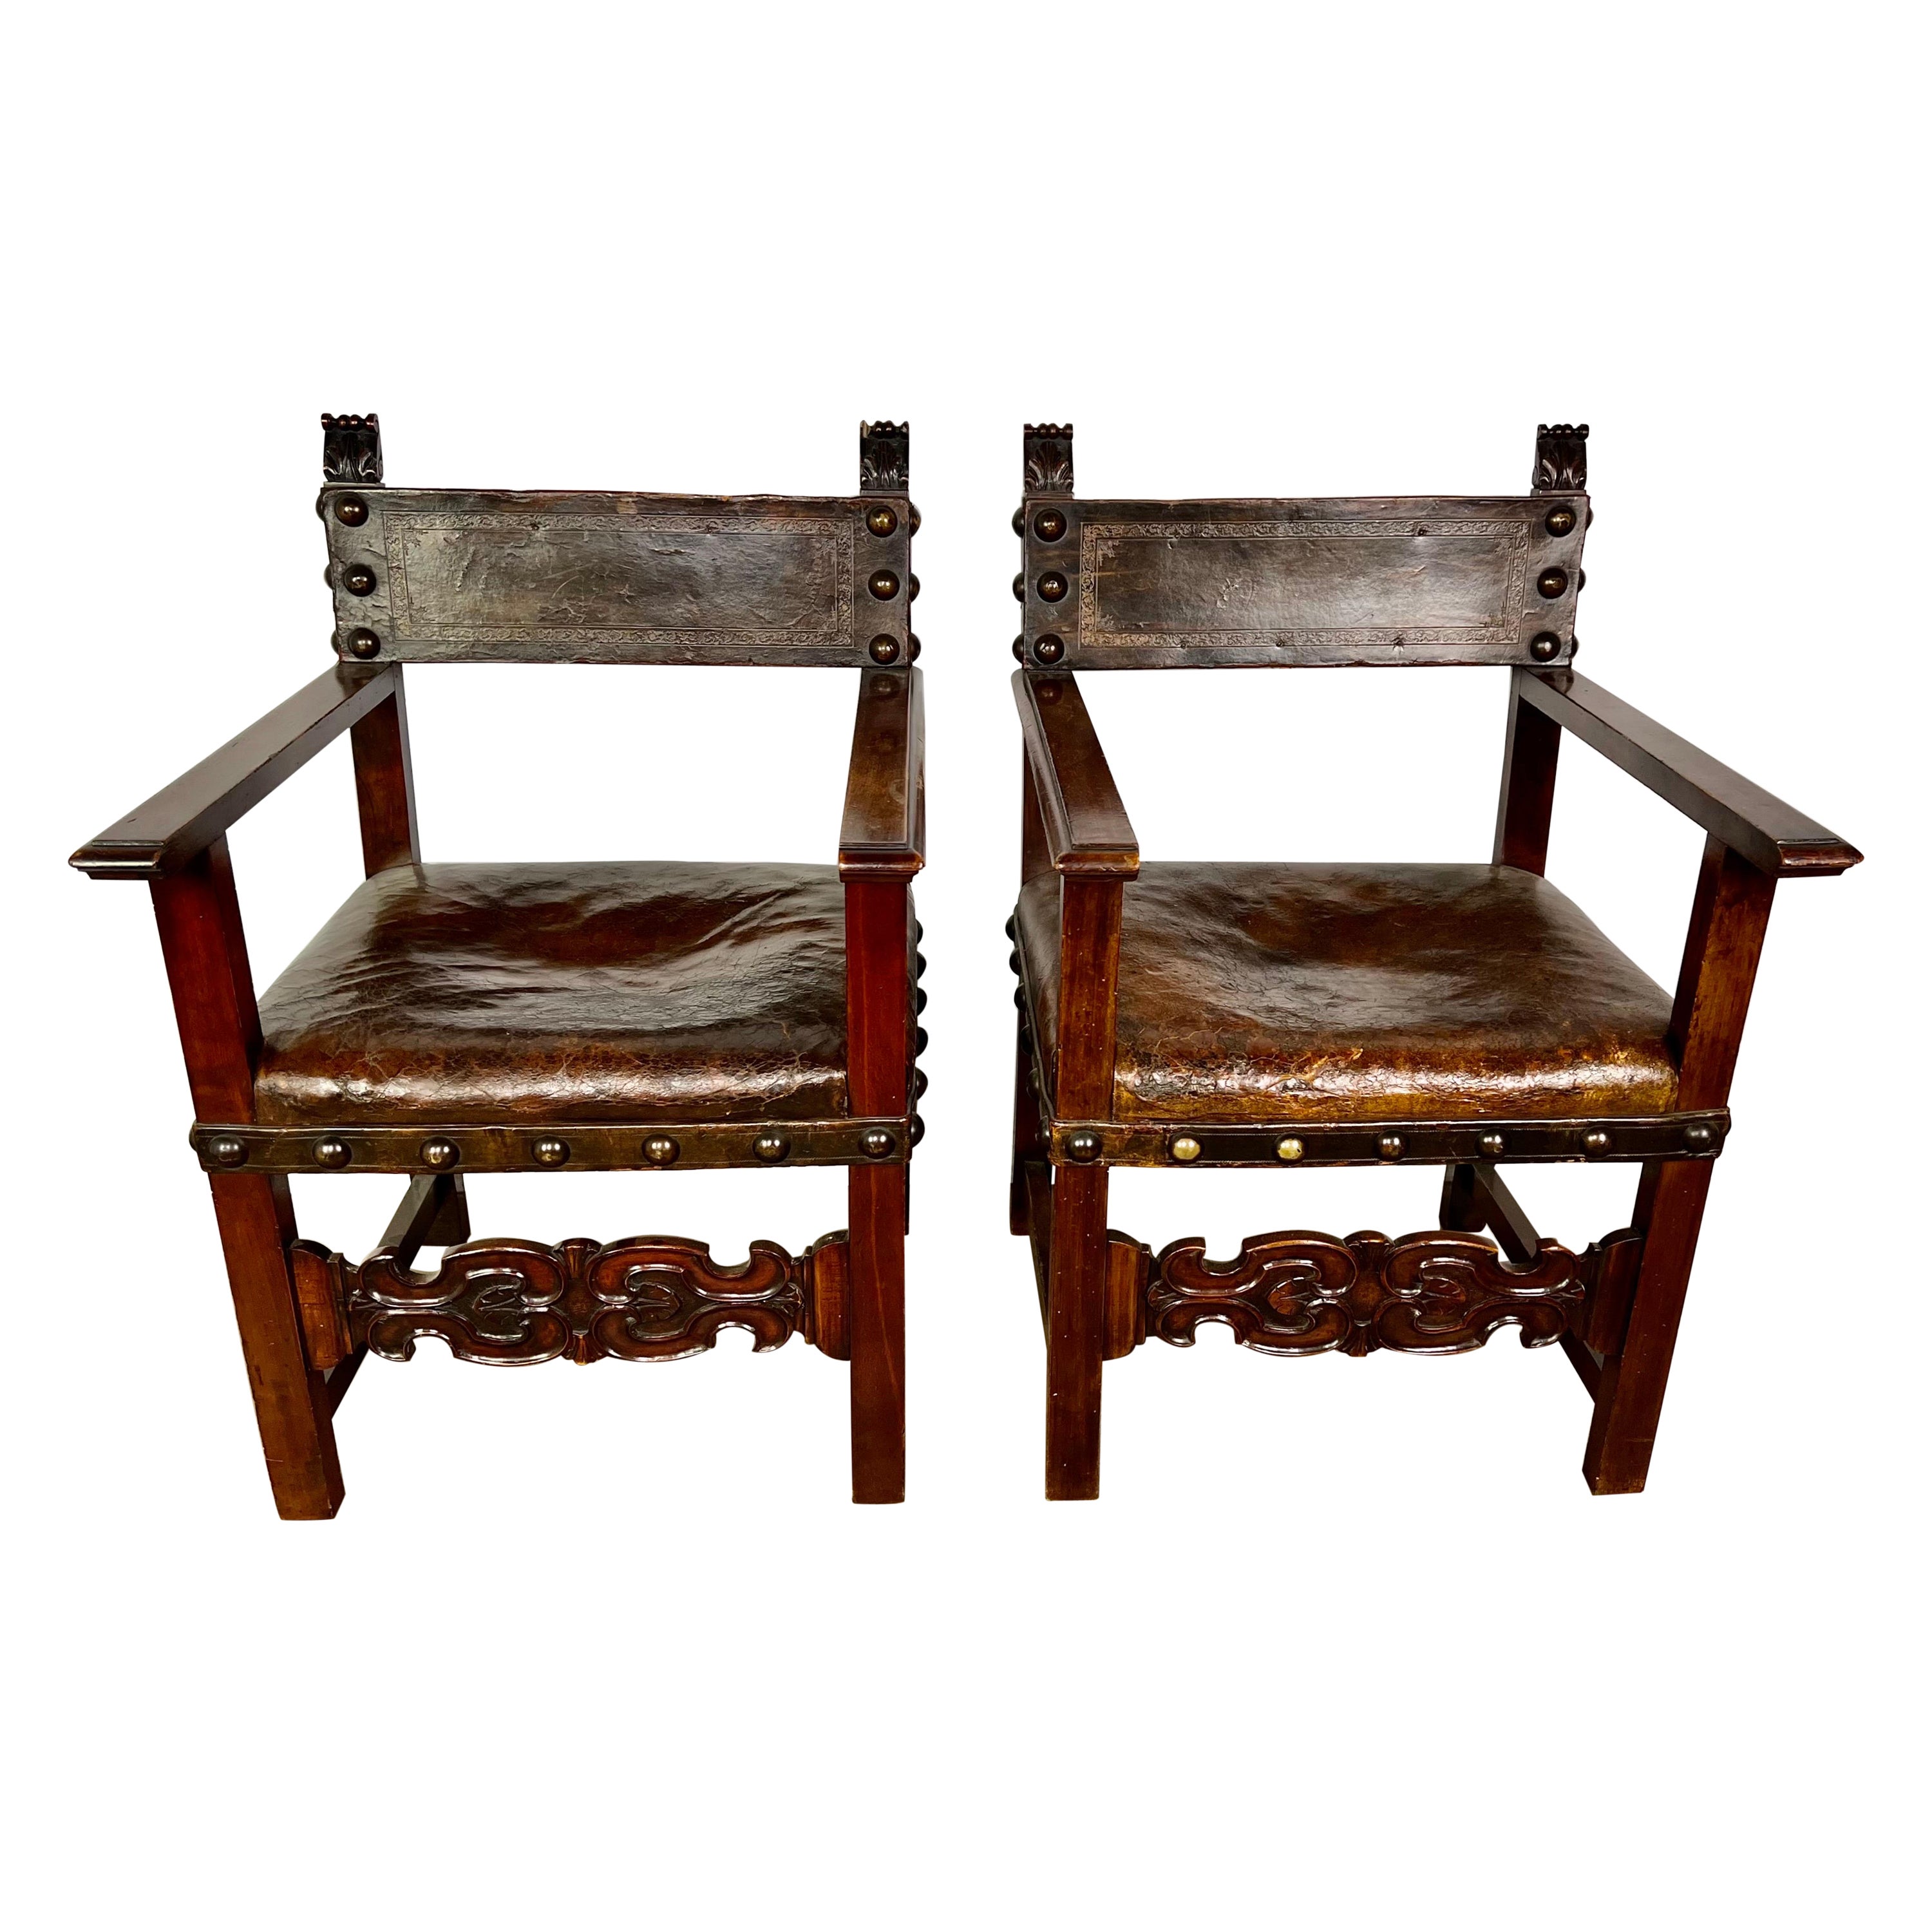 Pair of 19th C. Spanish Leather Armchairs